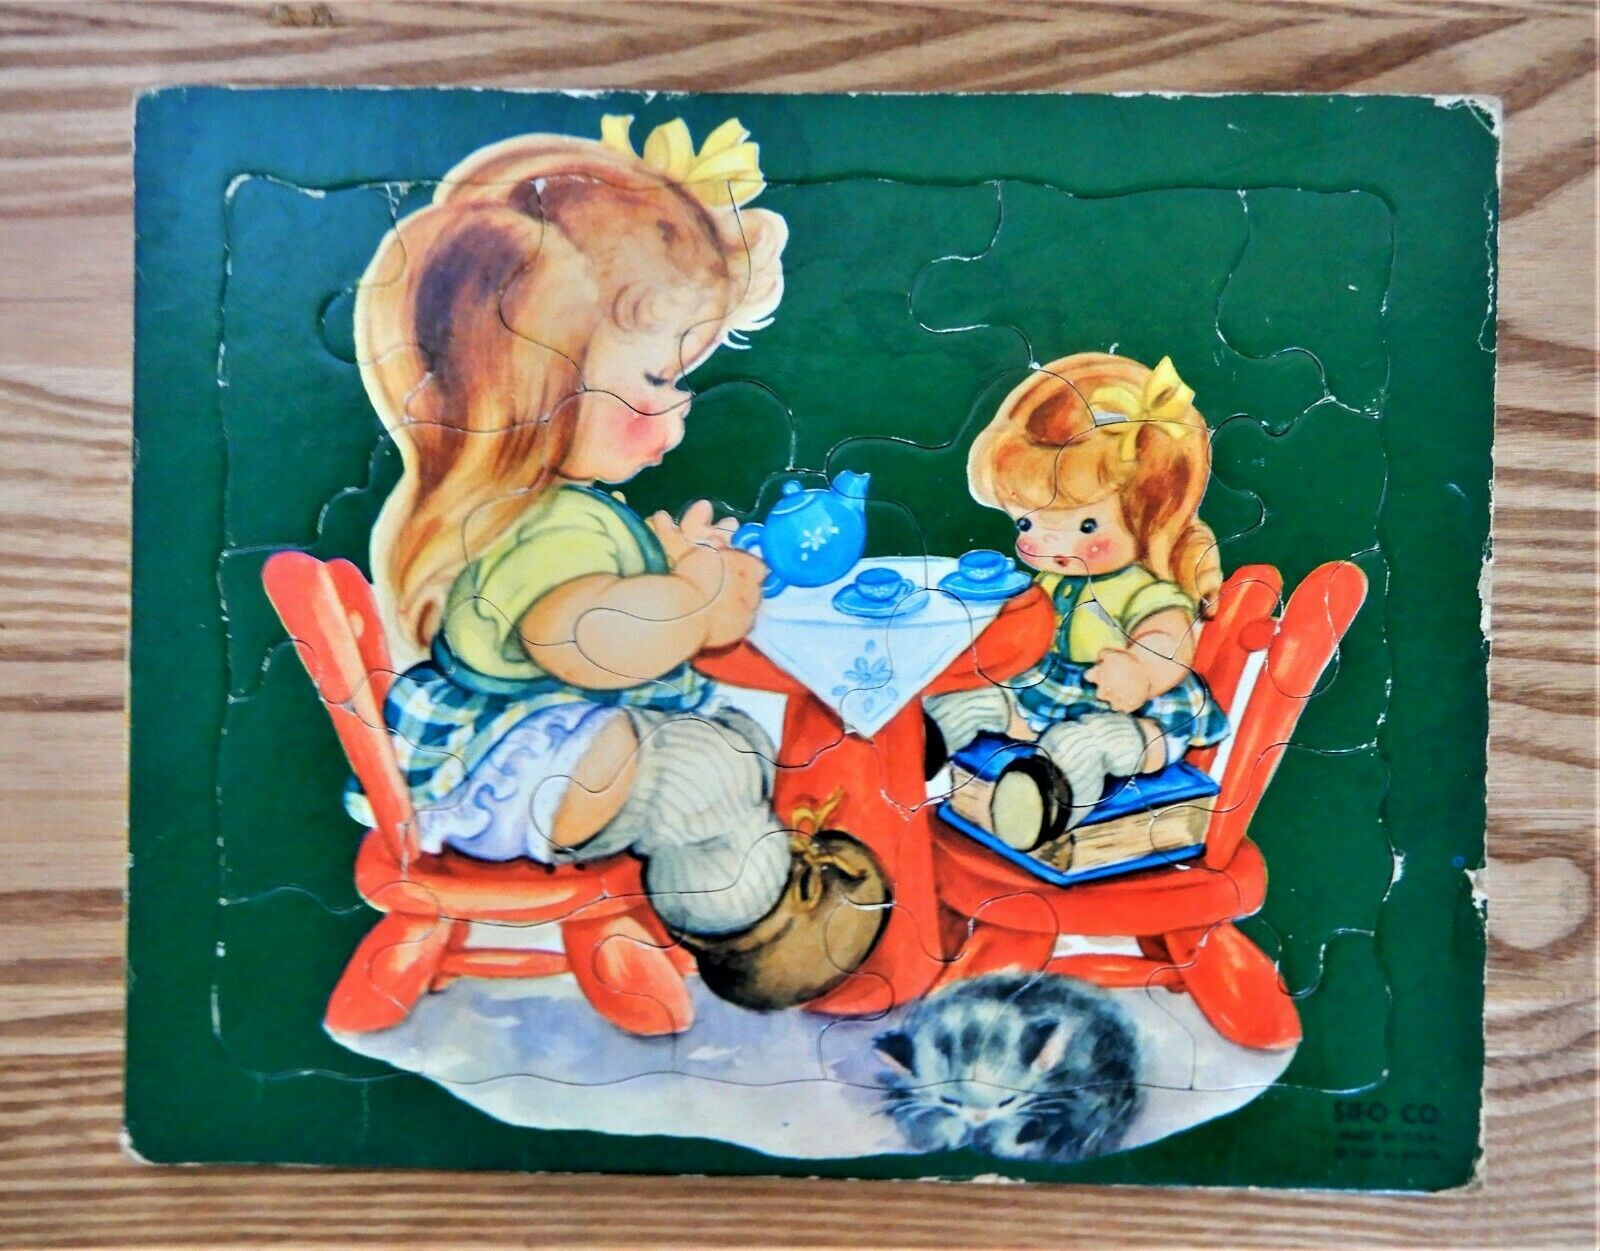 1961 Sifo Co Child & Doll Tea Party Preschool Inlaid Jigsaw Puzzle Made in USA - $15.00